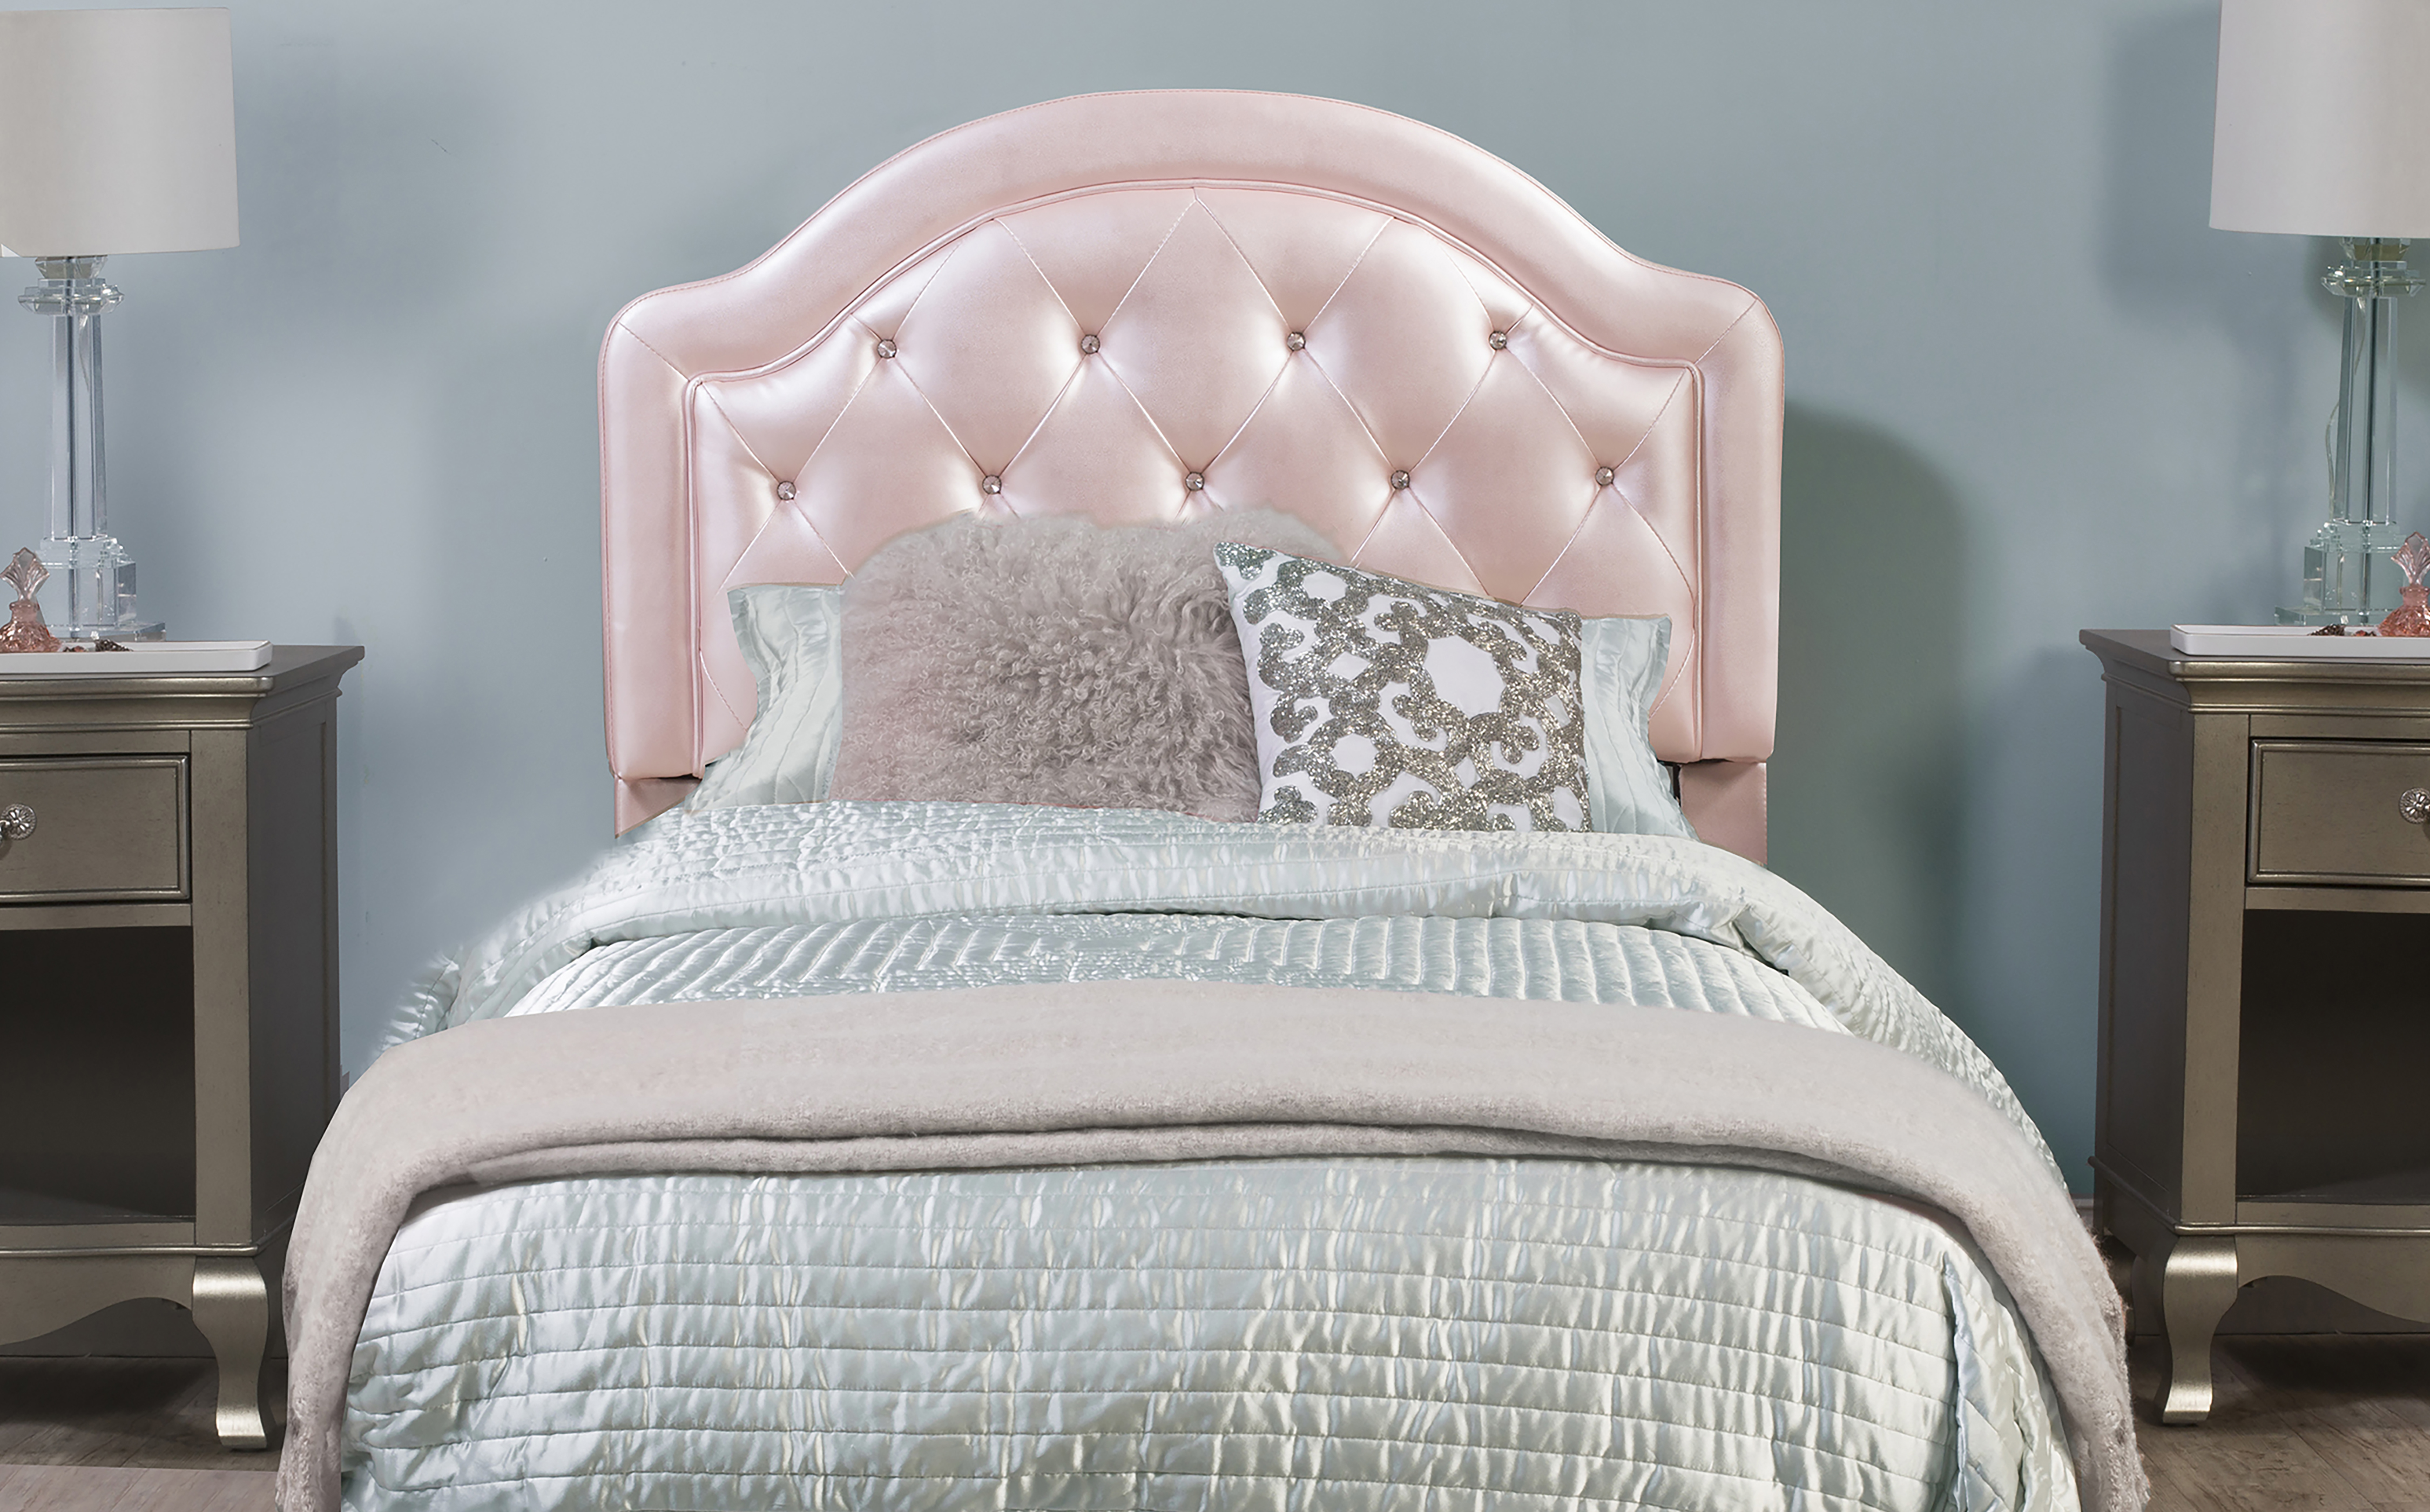 Hillsdale Furniture Karley Tufted Faux Leather Twin Headboard, Embossed Pink - image 3 of 5